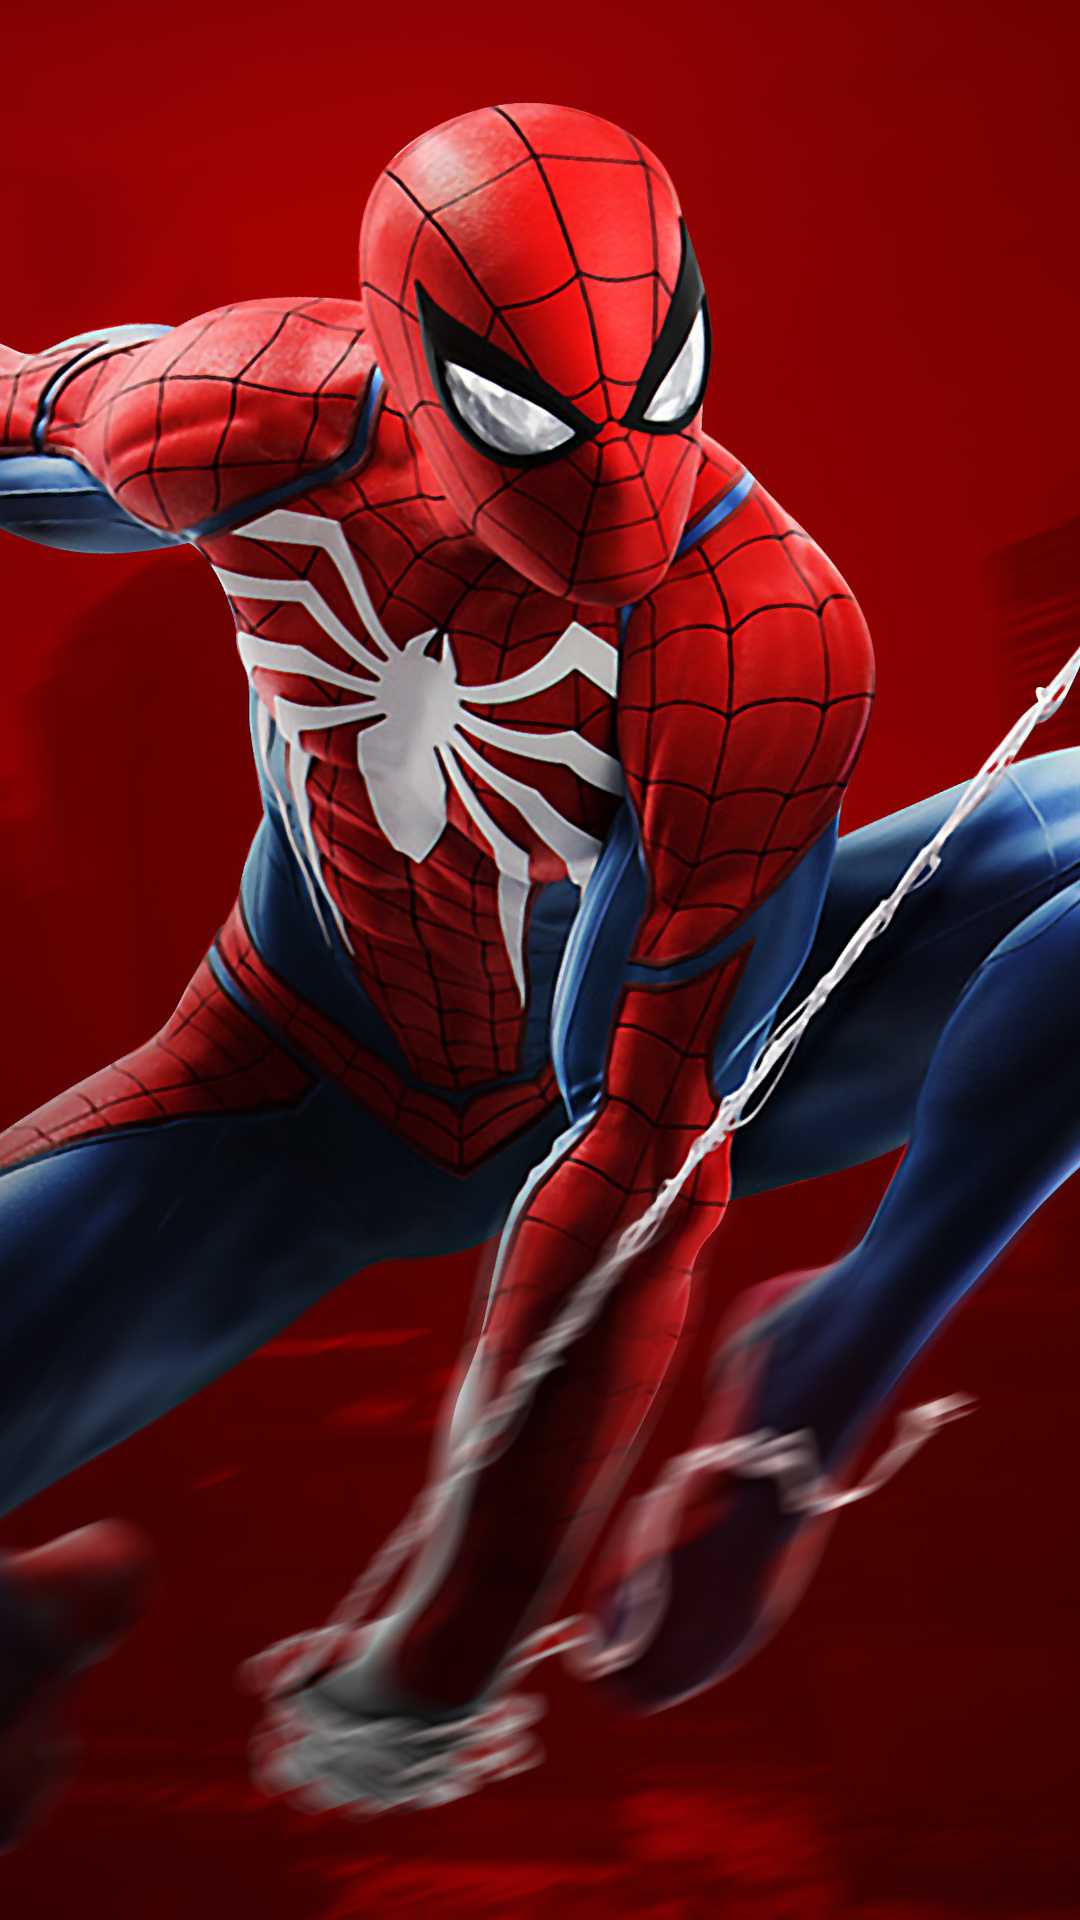 Spider-Man PS4, 4K iPhone 7, Pixel XL One Plus, HD wallpapers images, 1080x1920 Full HD Handy